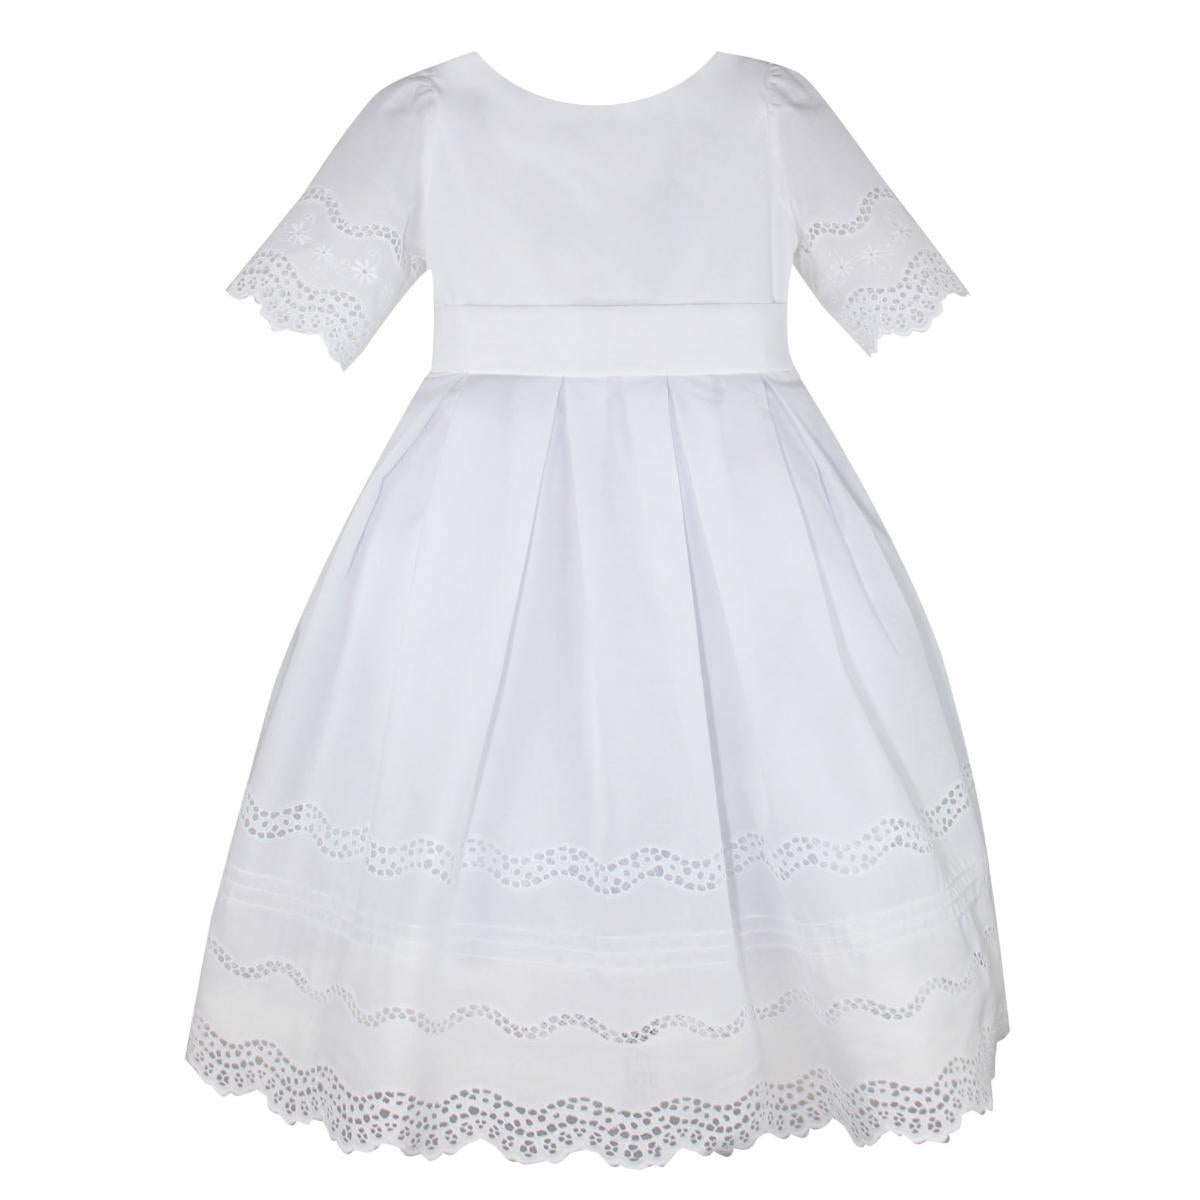 BEAUTIFUL COTTON EMBROIDERED LACE DRESS